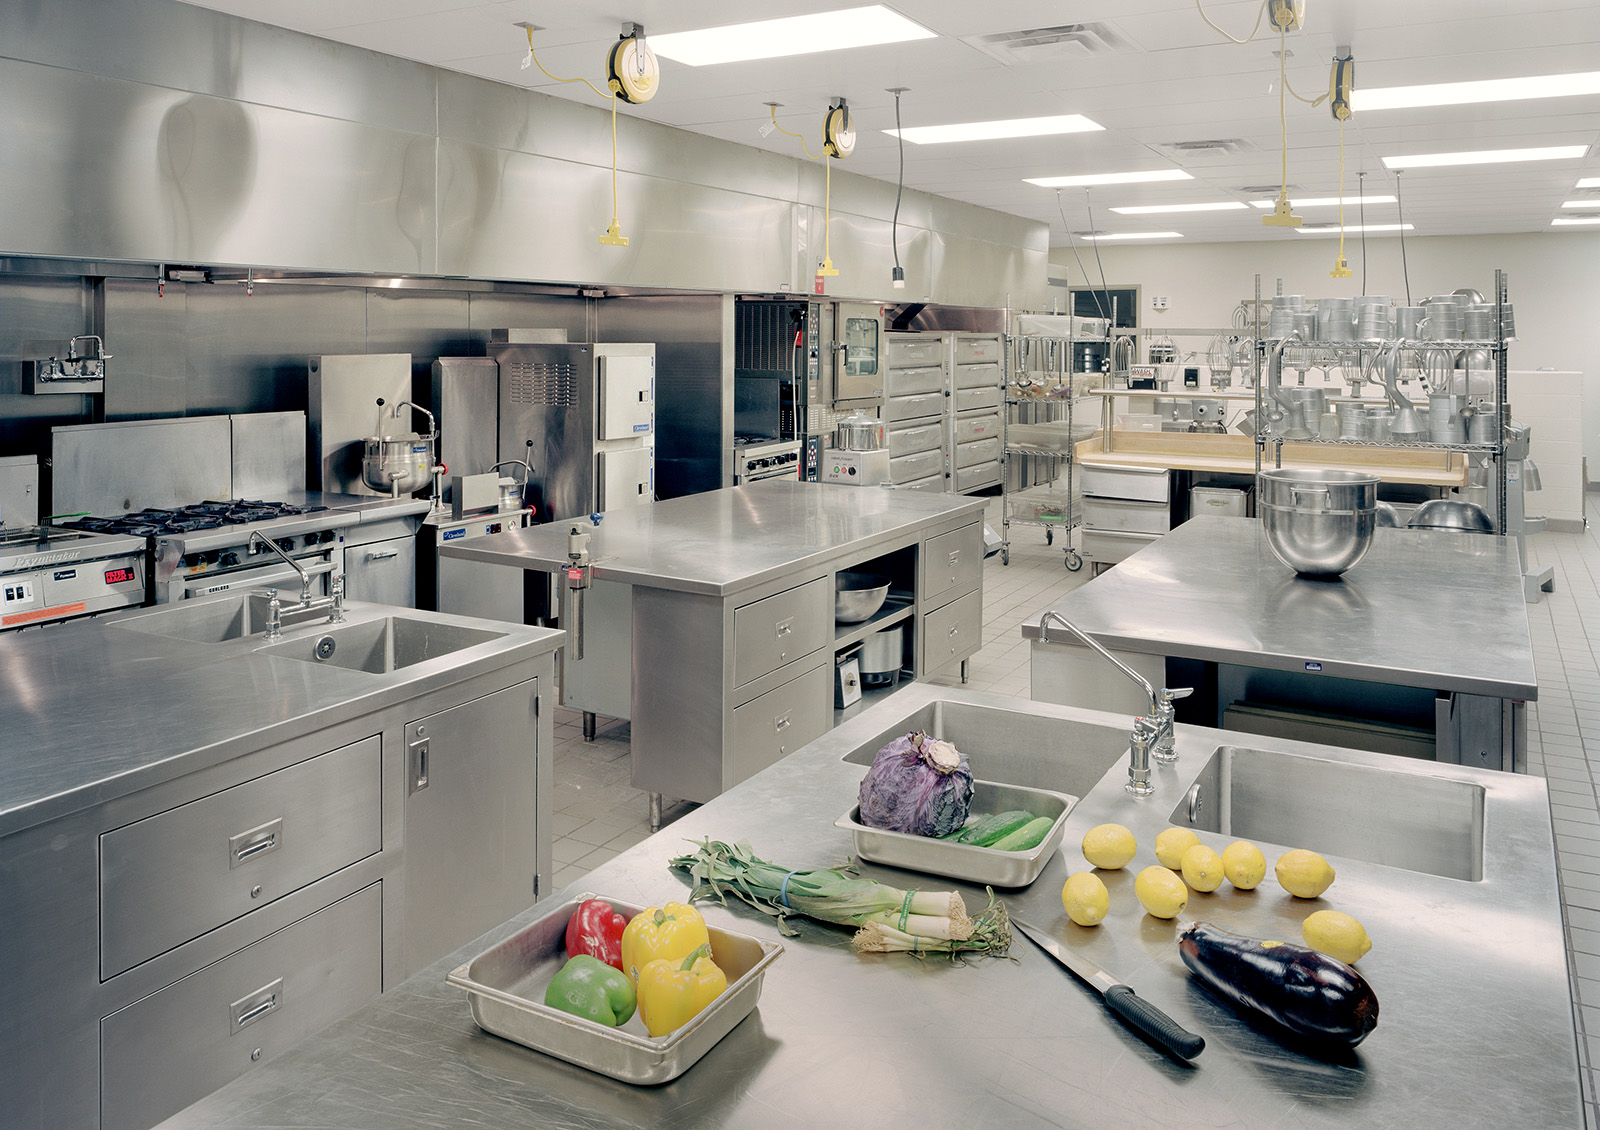 henry-ford-community-college-student-center-kitchen